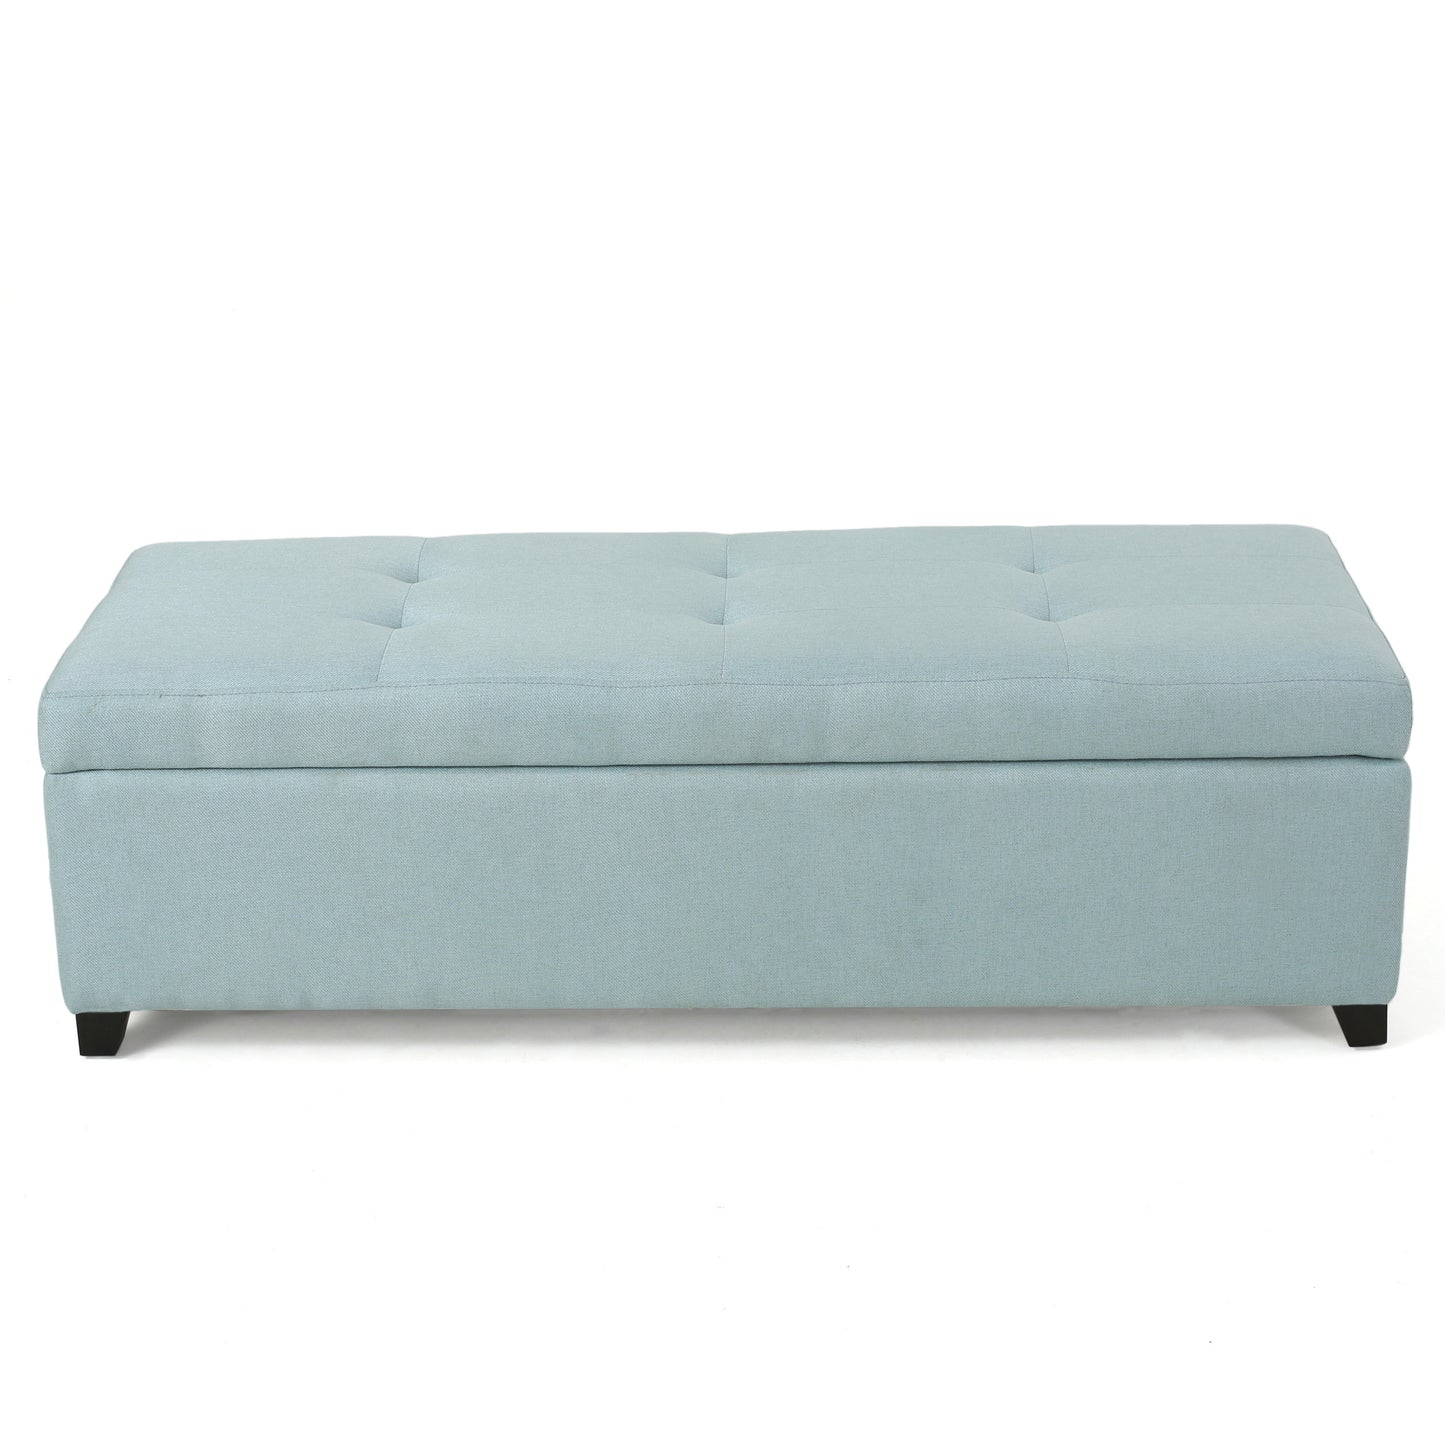 Bajia Contemporary Tufted Fabric Storage Ottoman Bench